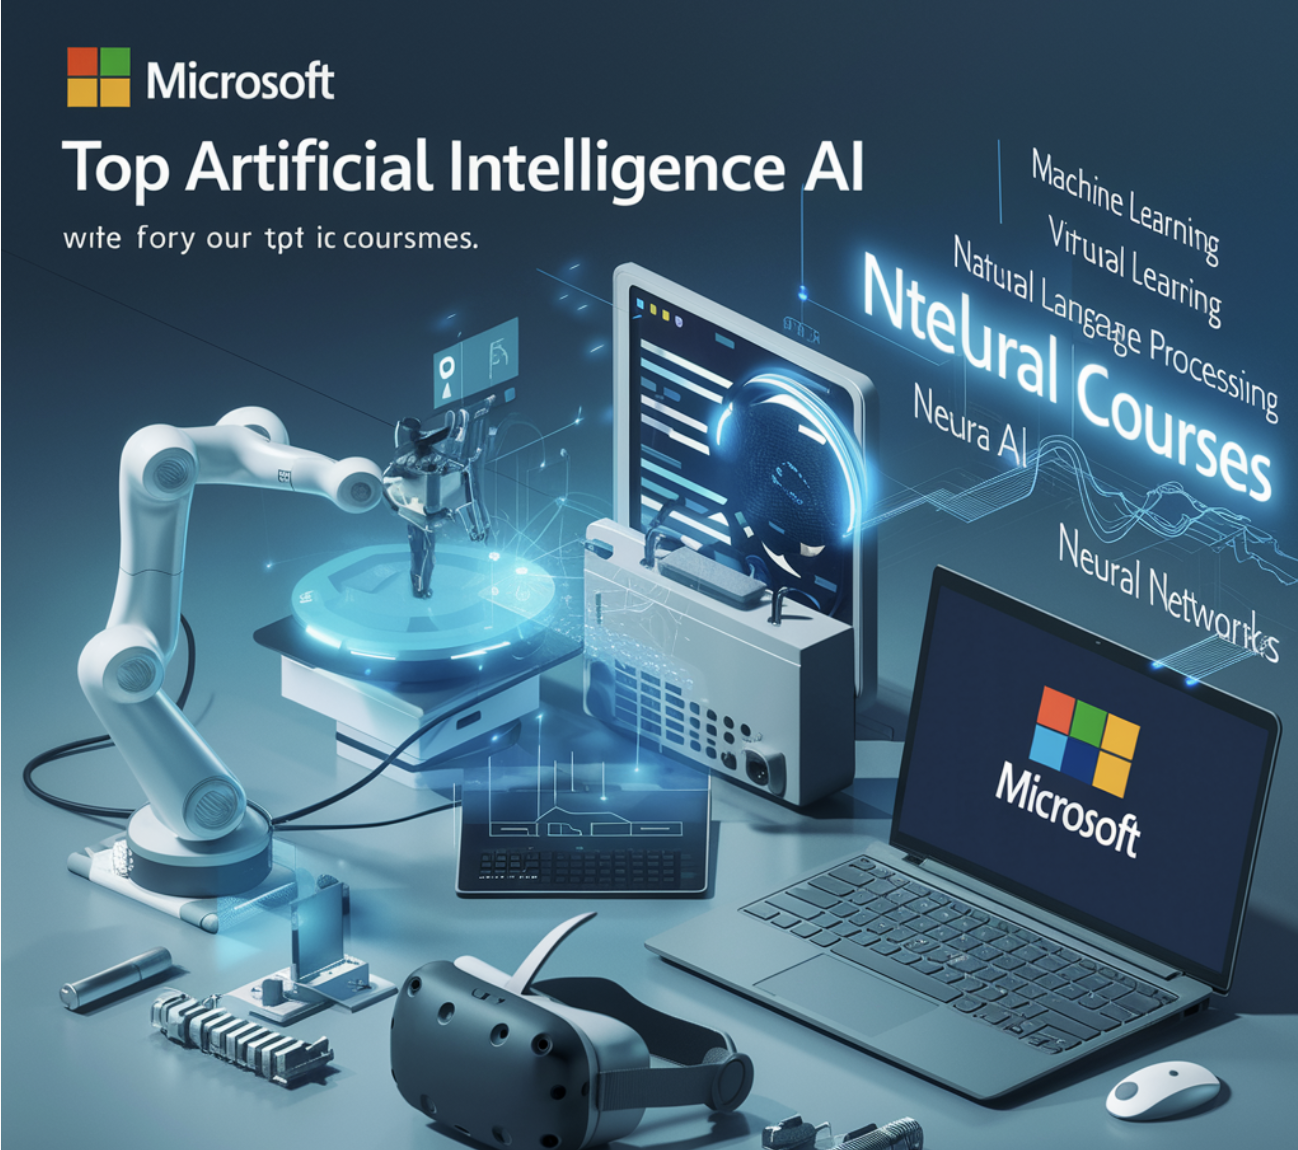  Top Artificial Intelligence AI Courses by Microsoft